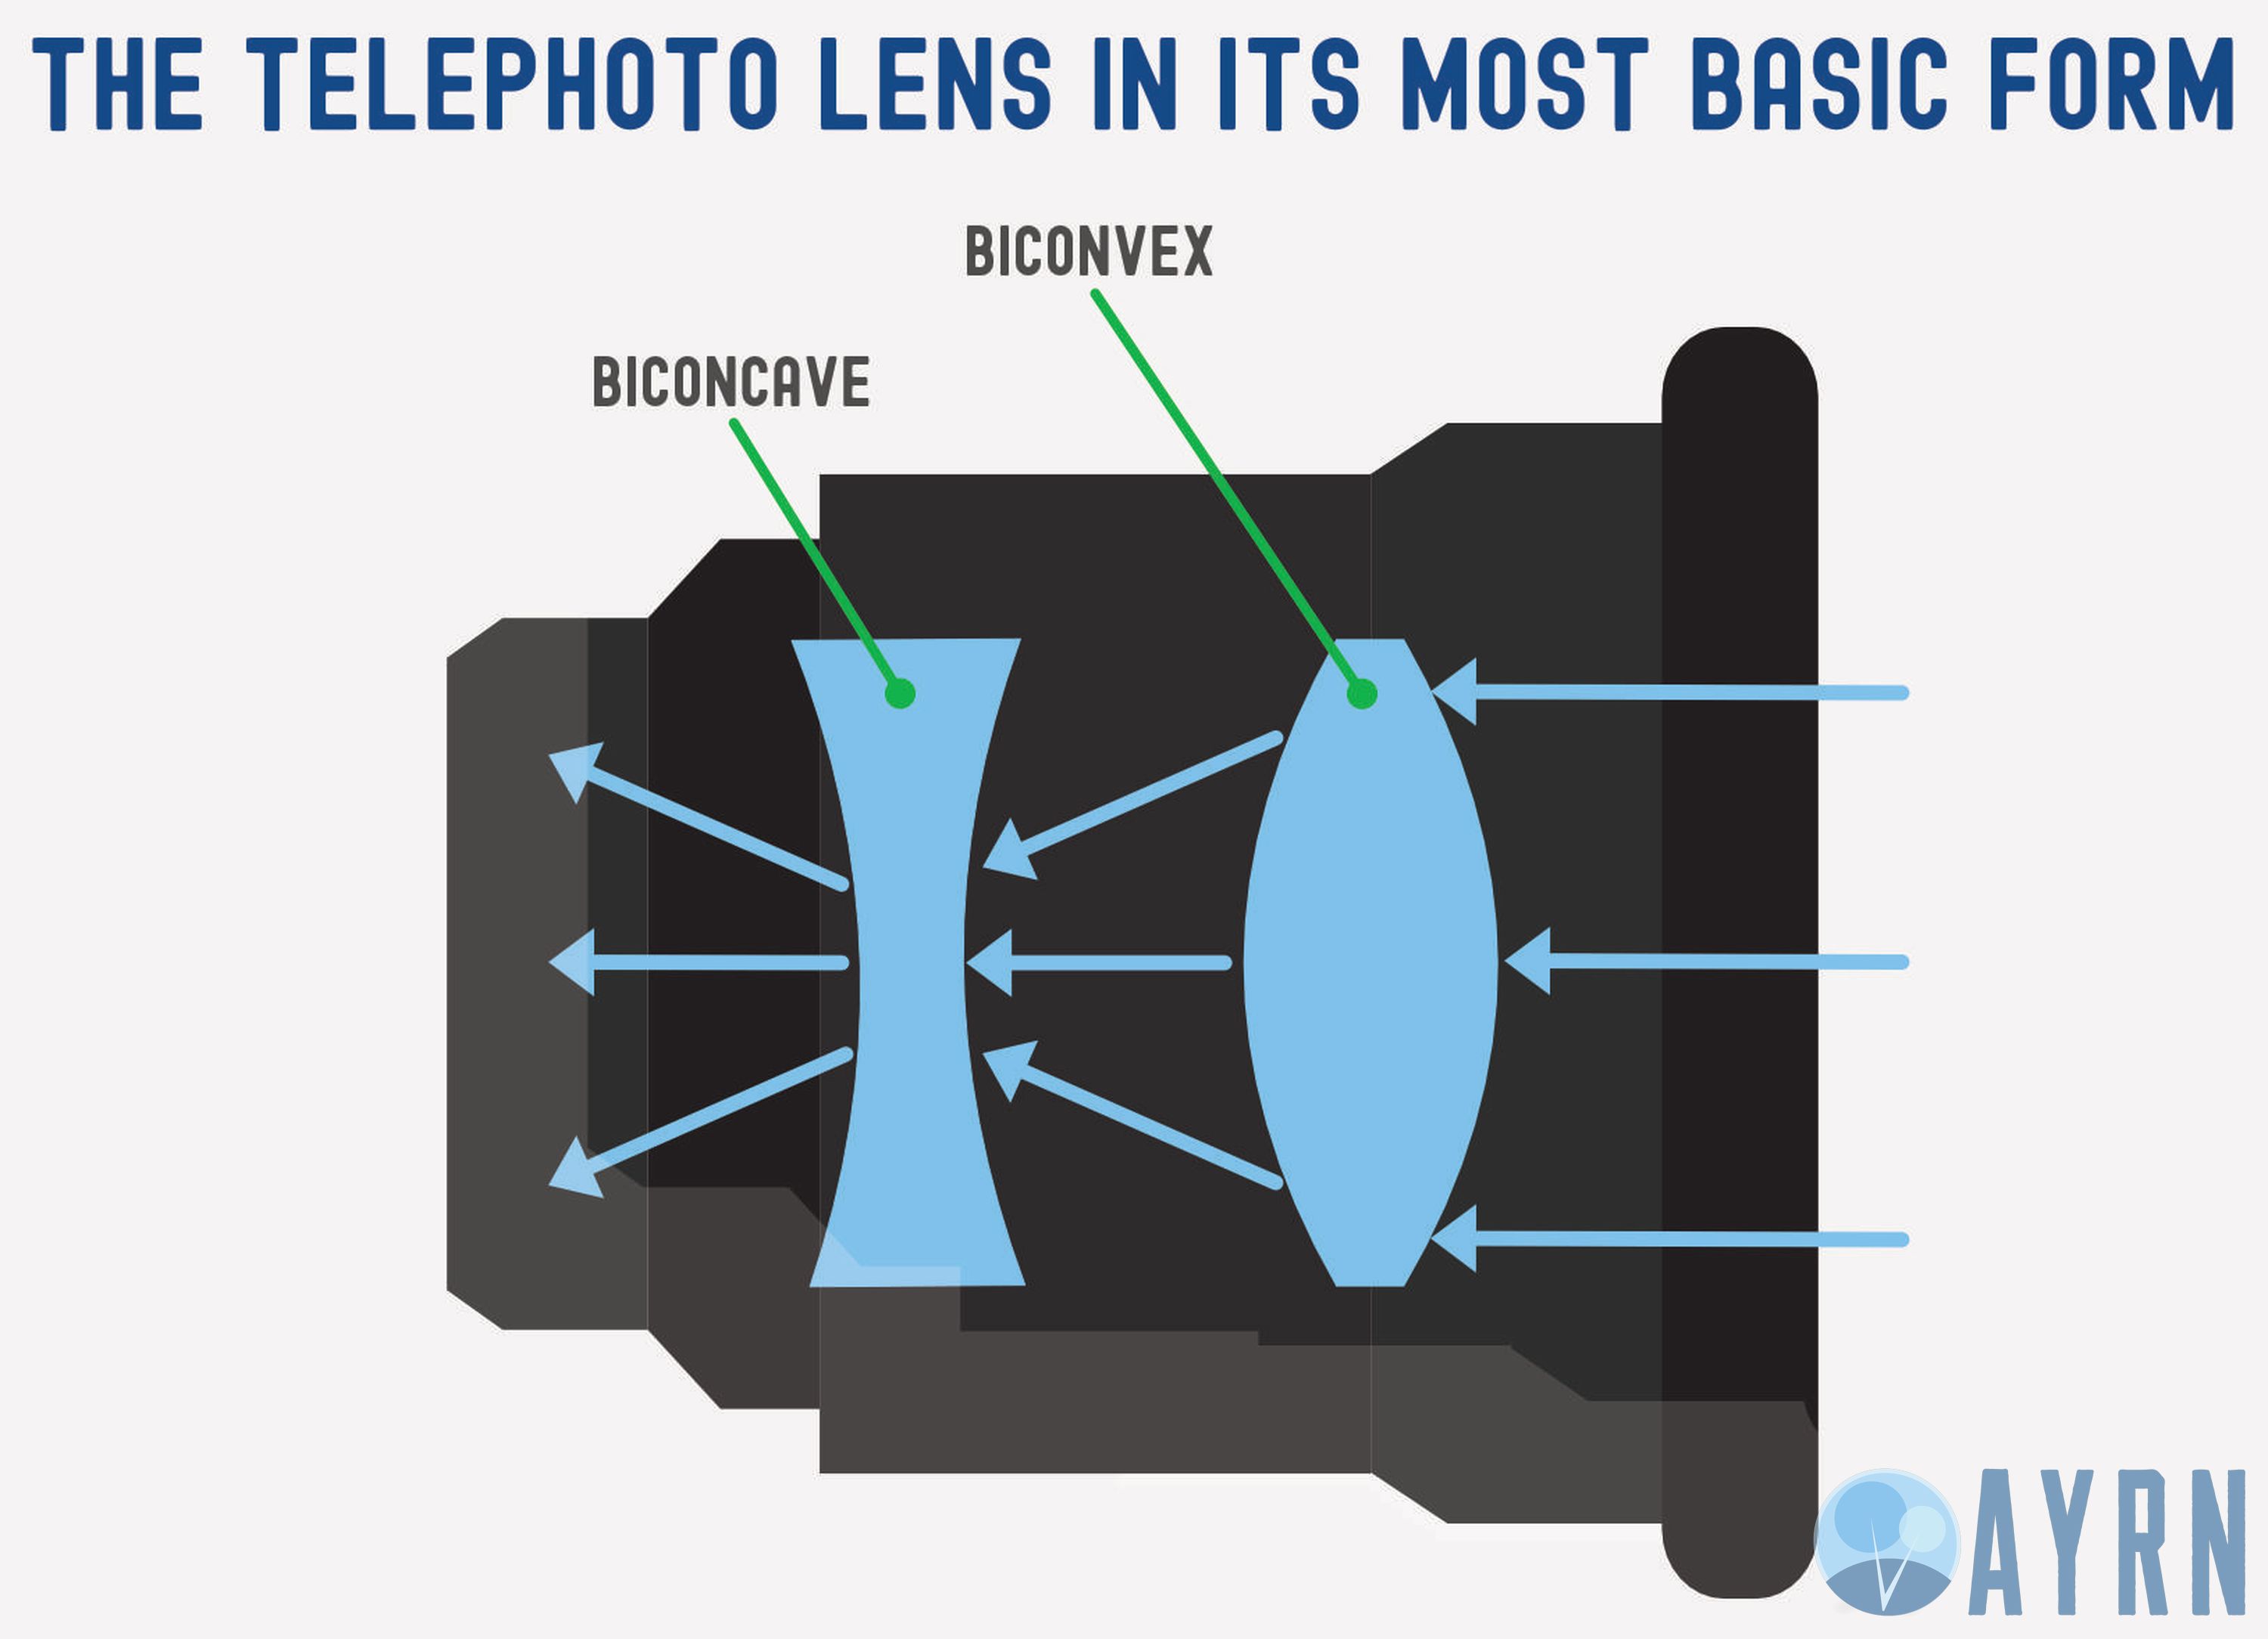 How light passes through the biconvex and biconcave elements of a telephoto lens